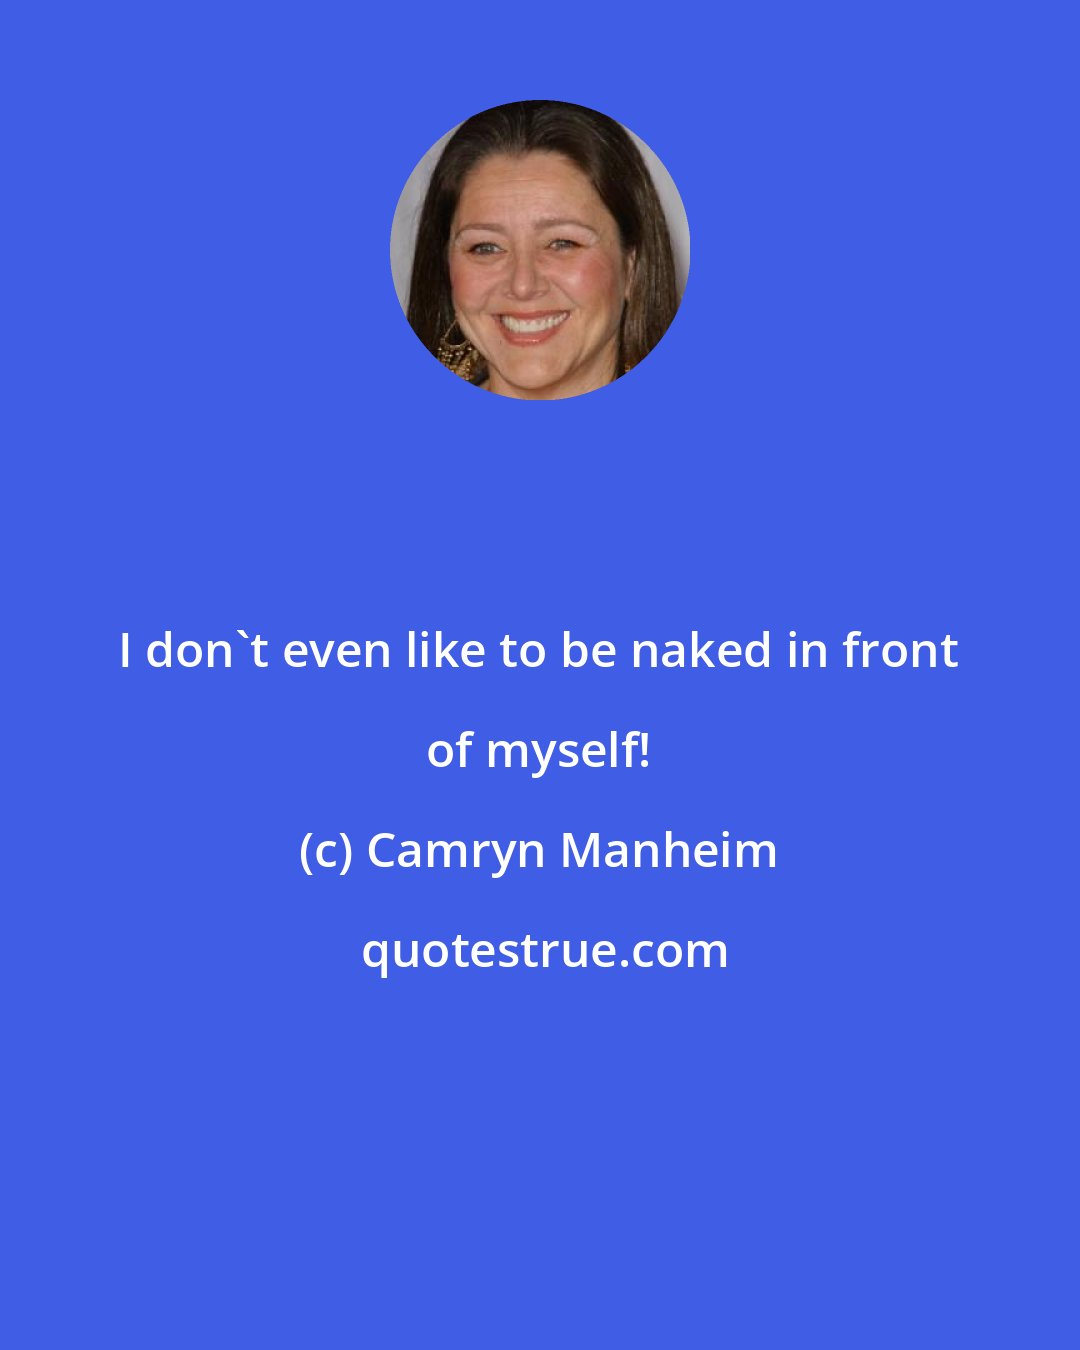 Camryn Manheim: I don't even like to be naked in front of myself!